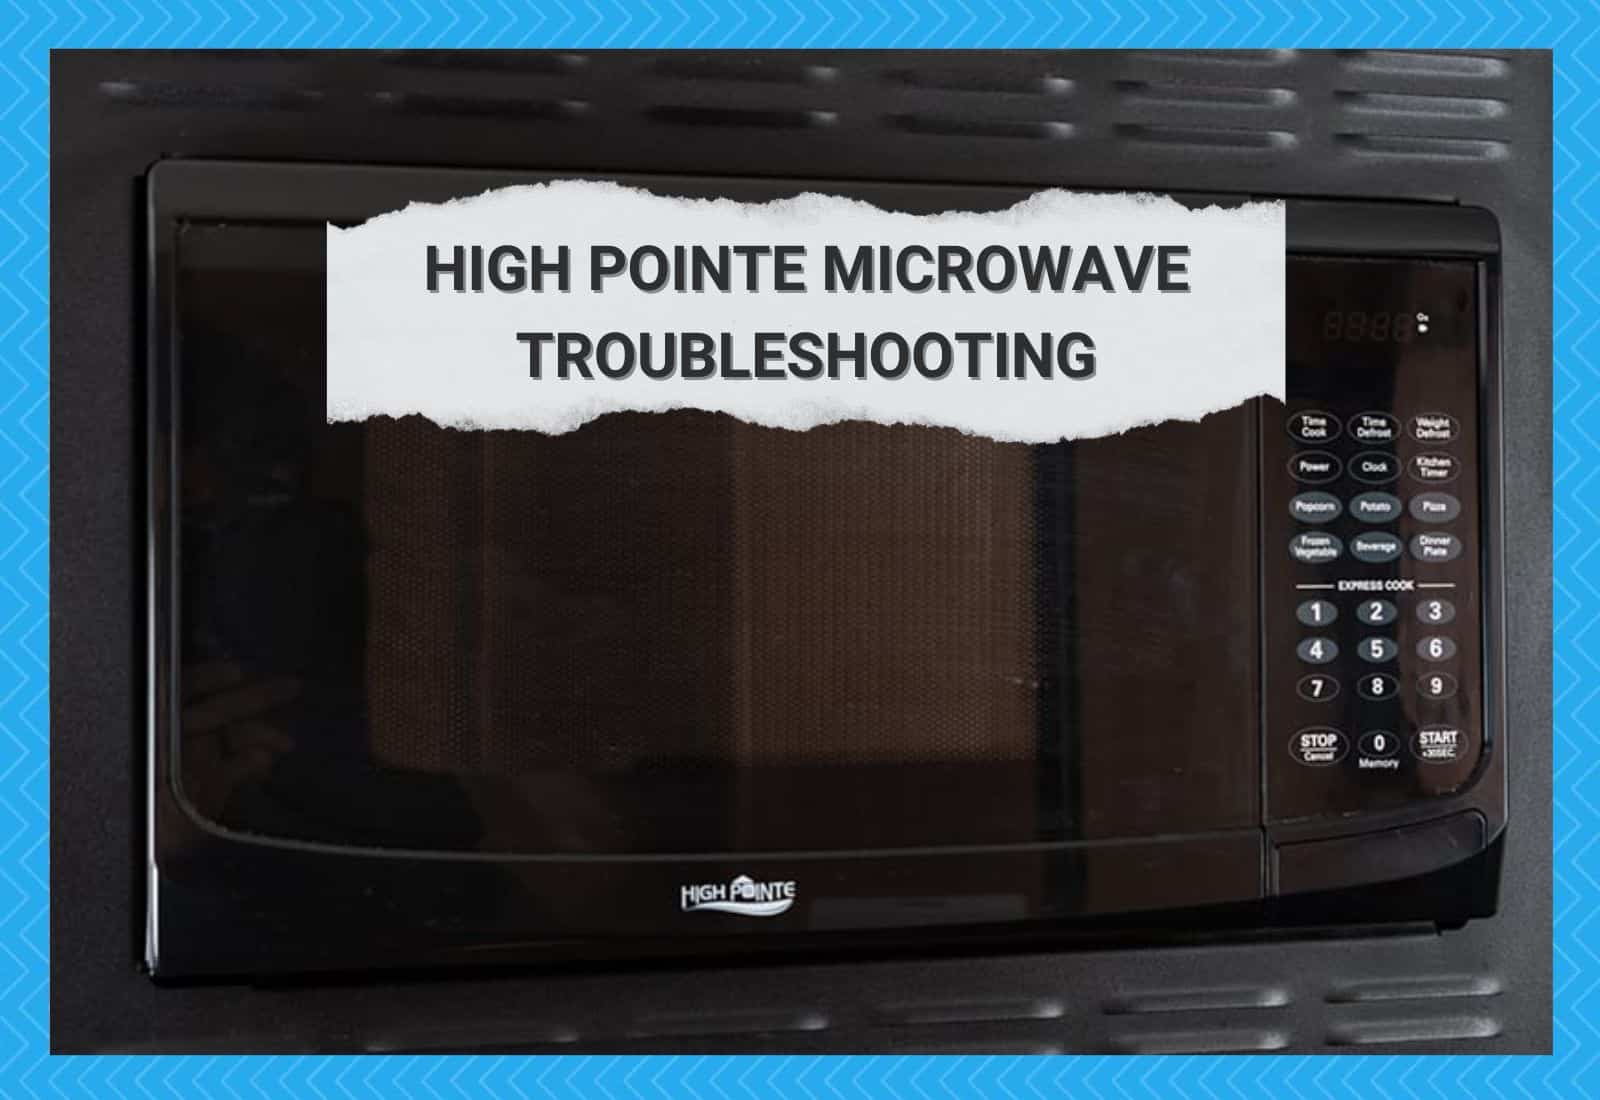 High Pointe Microwave Troubleshooting